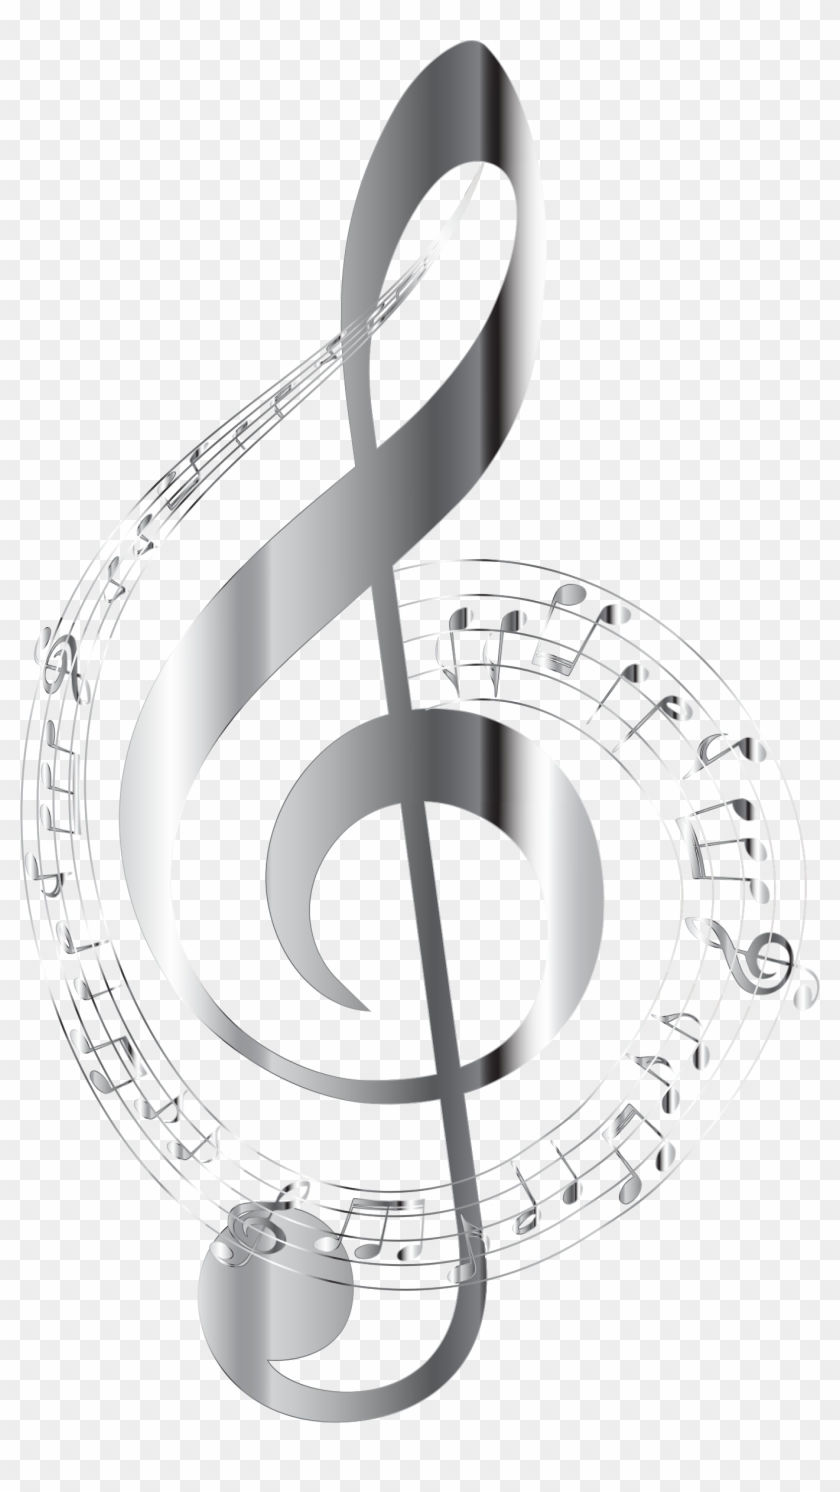 This Free Icons Png Design Of Chrome Musical Notes Clipart #254564